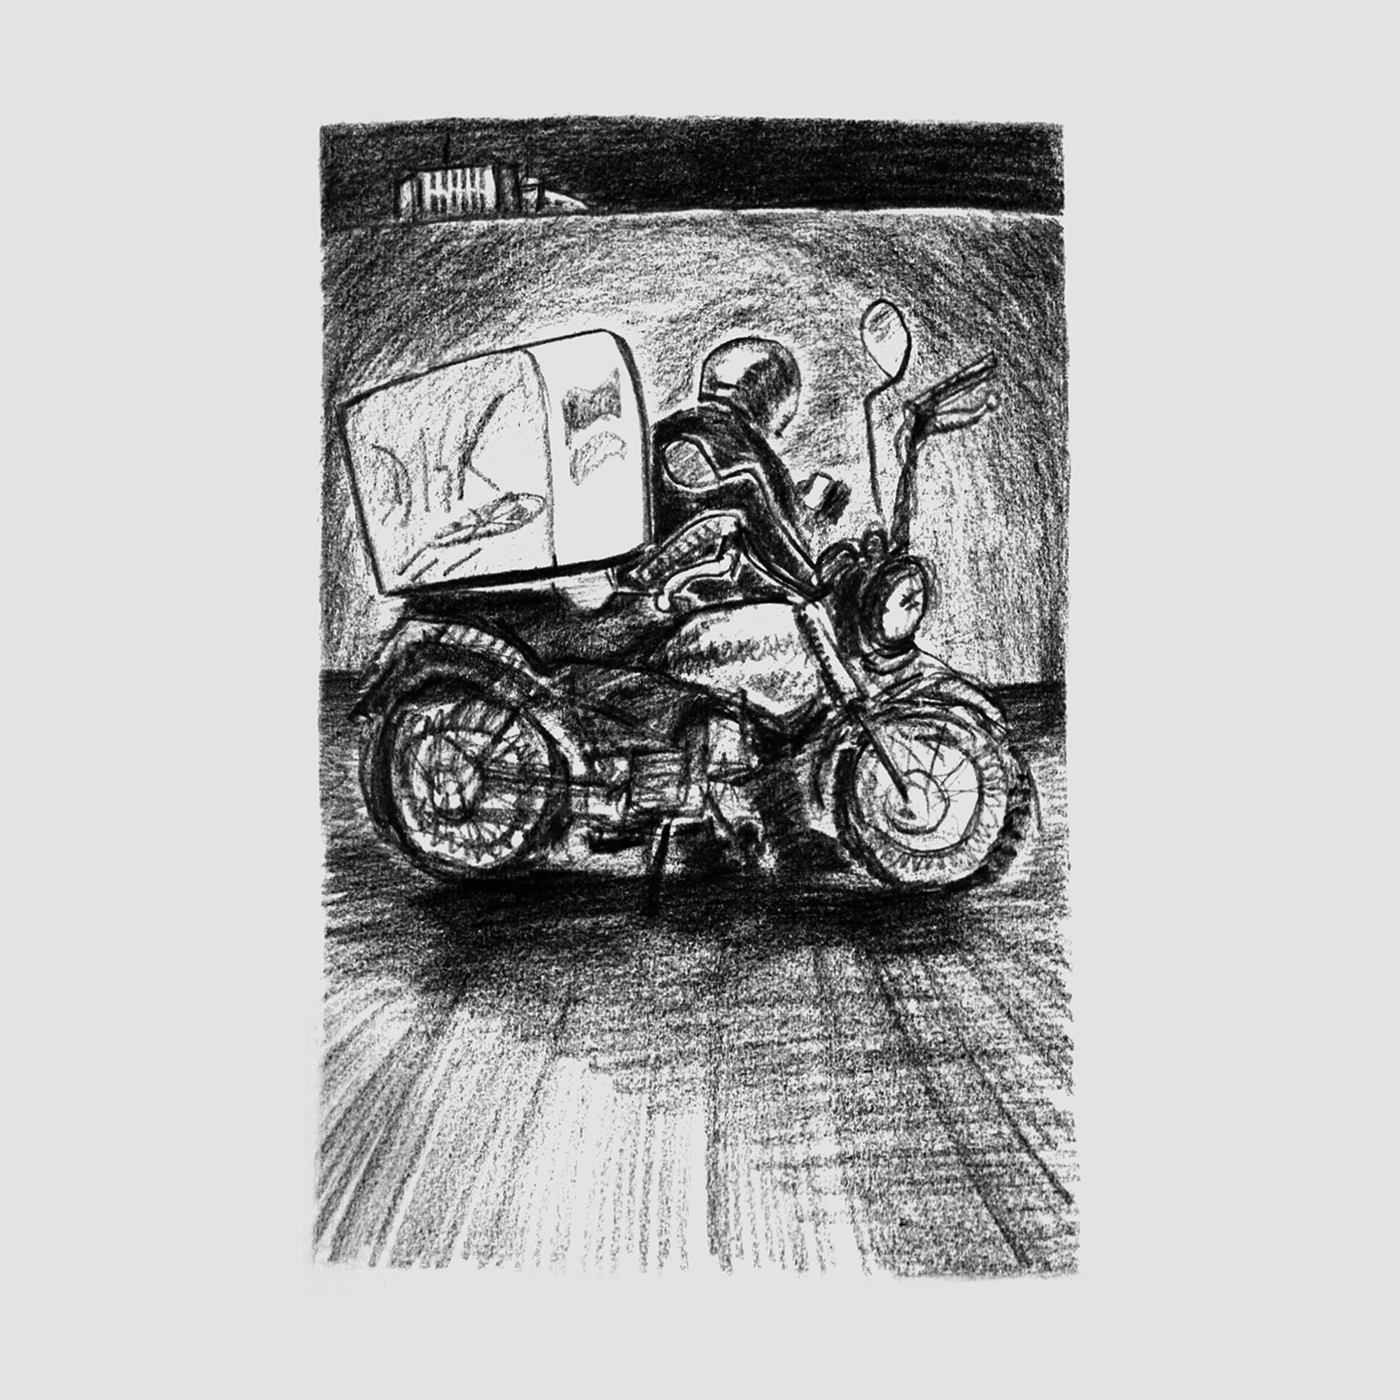 delivery motorcycle Bike night Urban city pencil